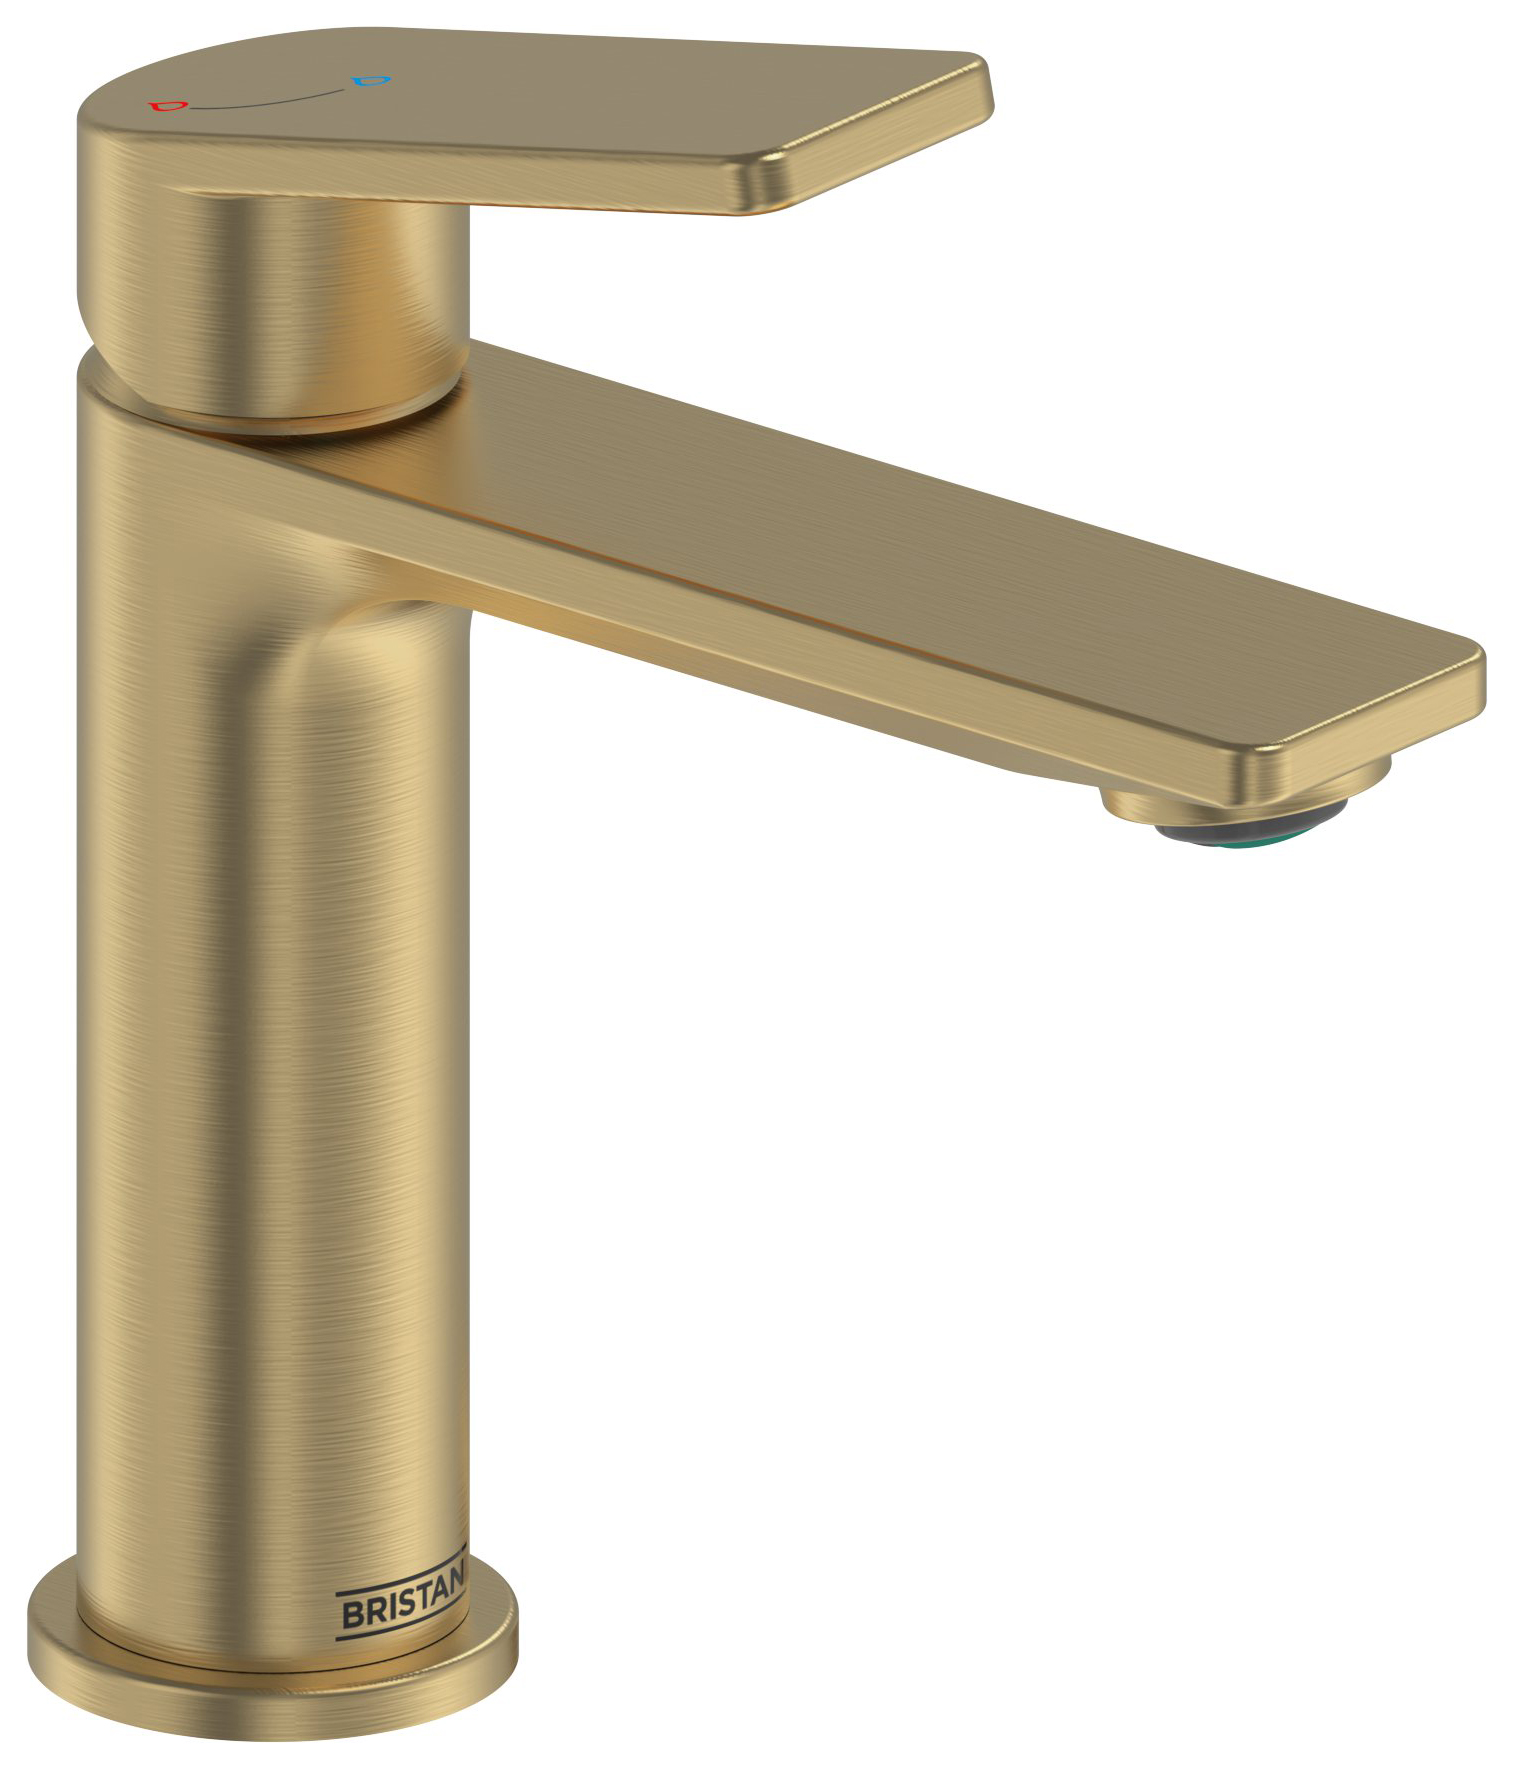 Image of Bristan Frammento Eco Start Small Basin Mixer with Clicker Waste - Brushed Brass